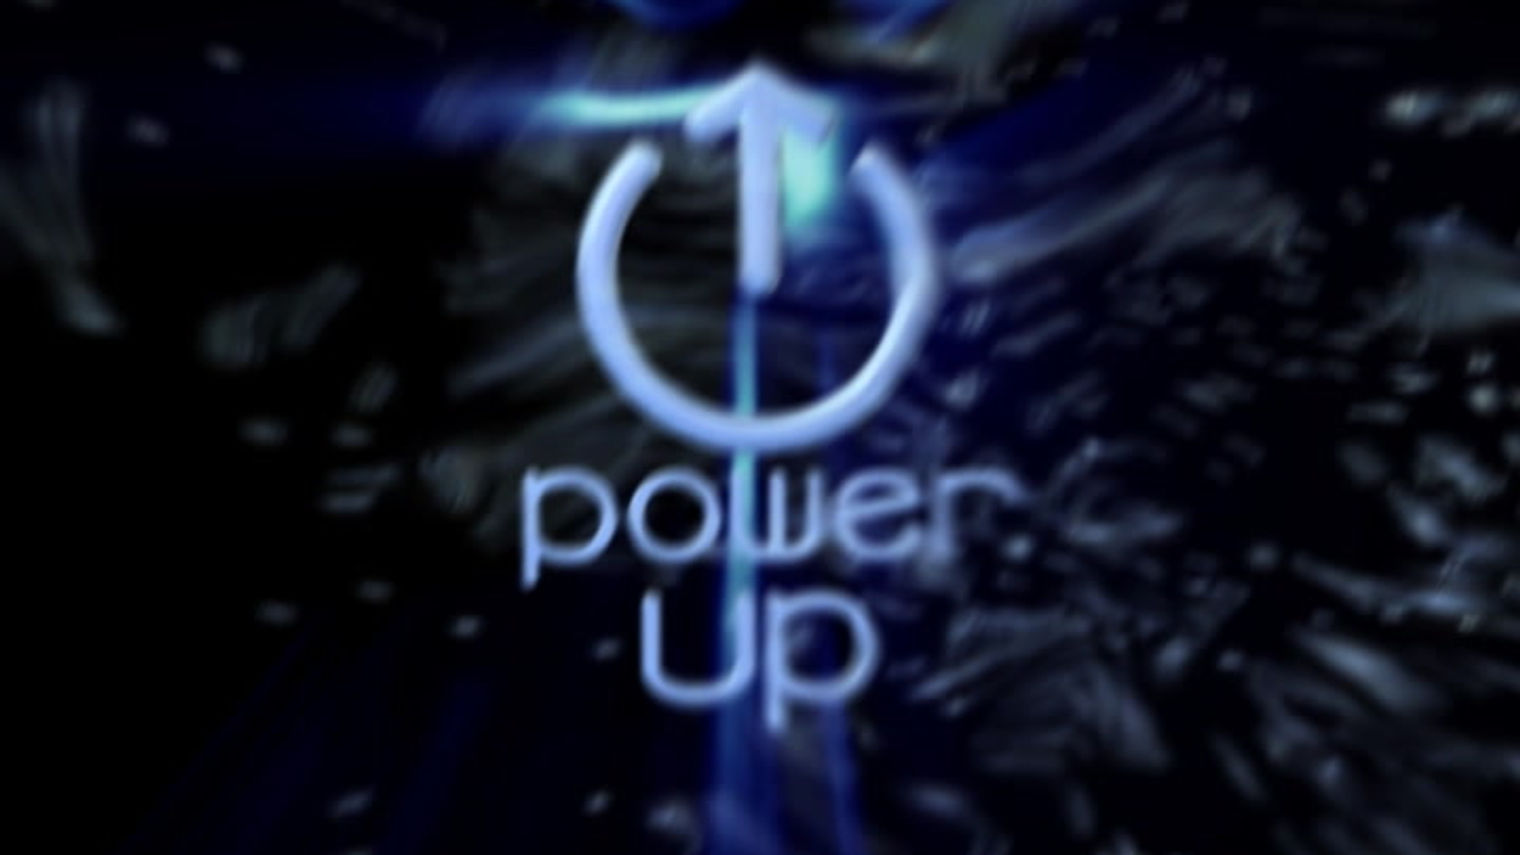 On The Run / Power Up